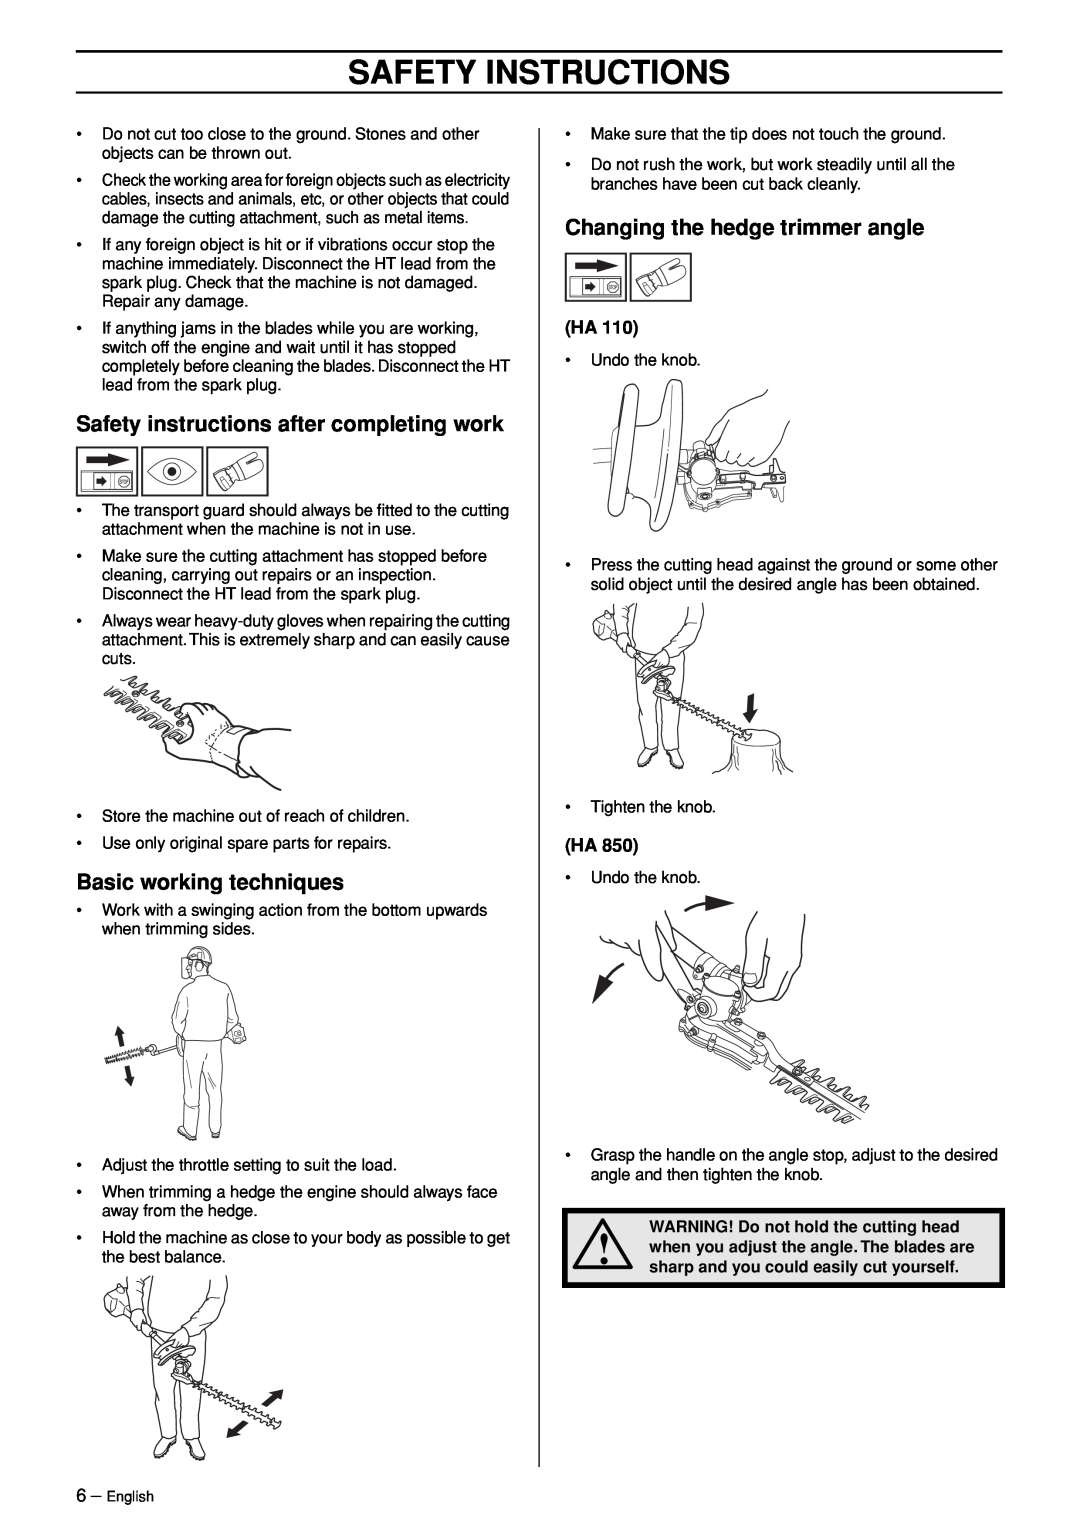 Husqvarna HA 110, HA 110 manual Safety instructions after completing work, Basic working techniques, Safety Instructions 